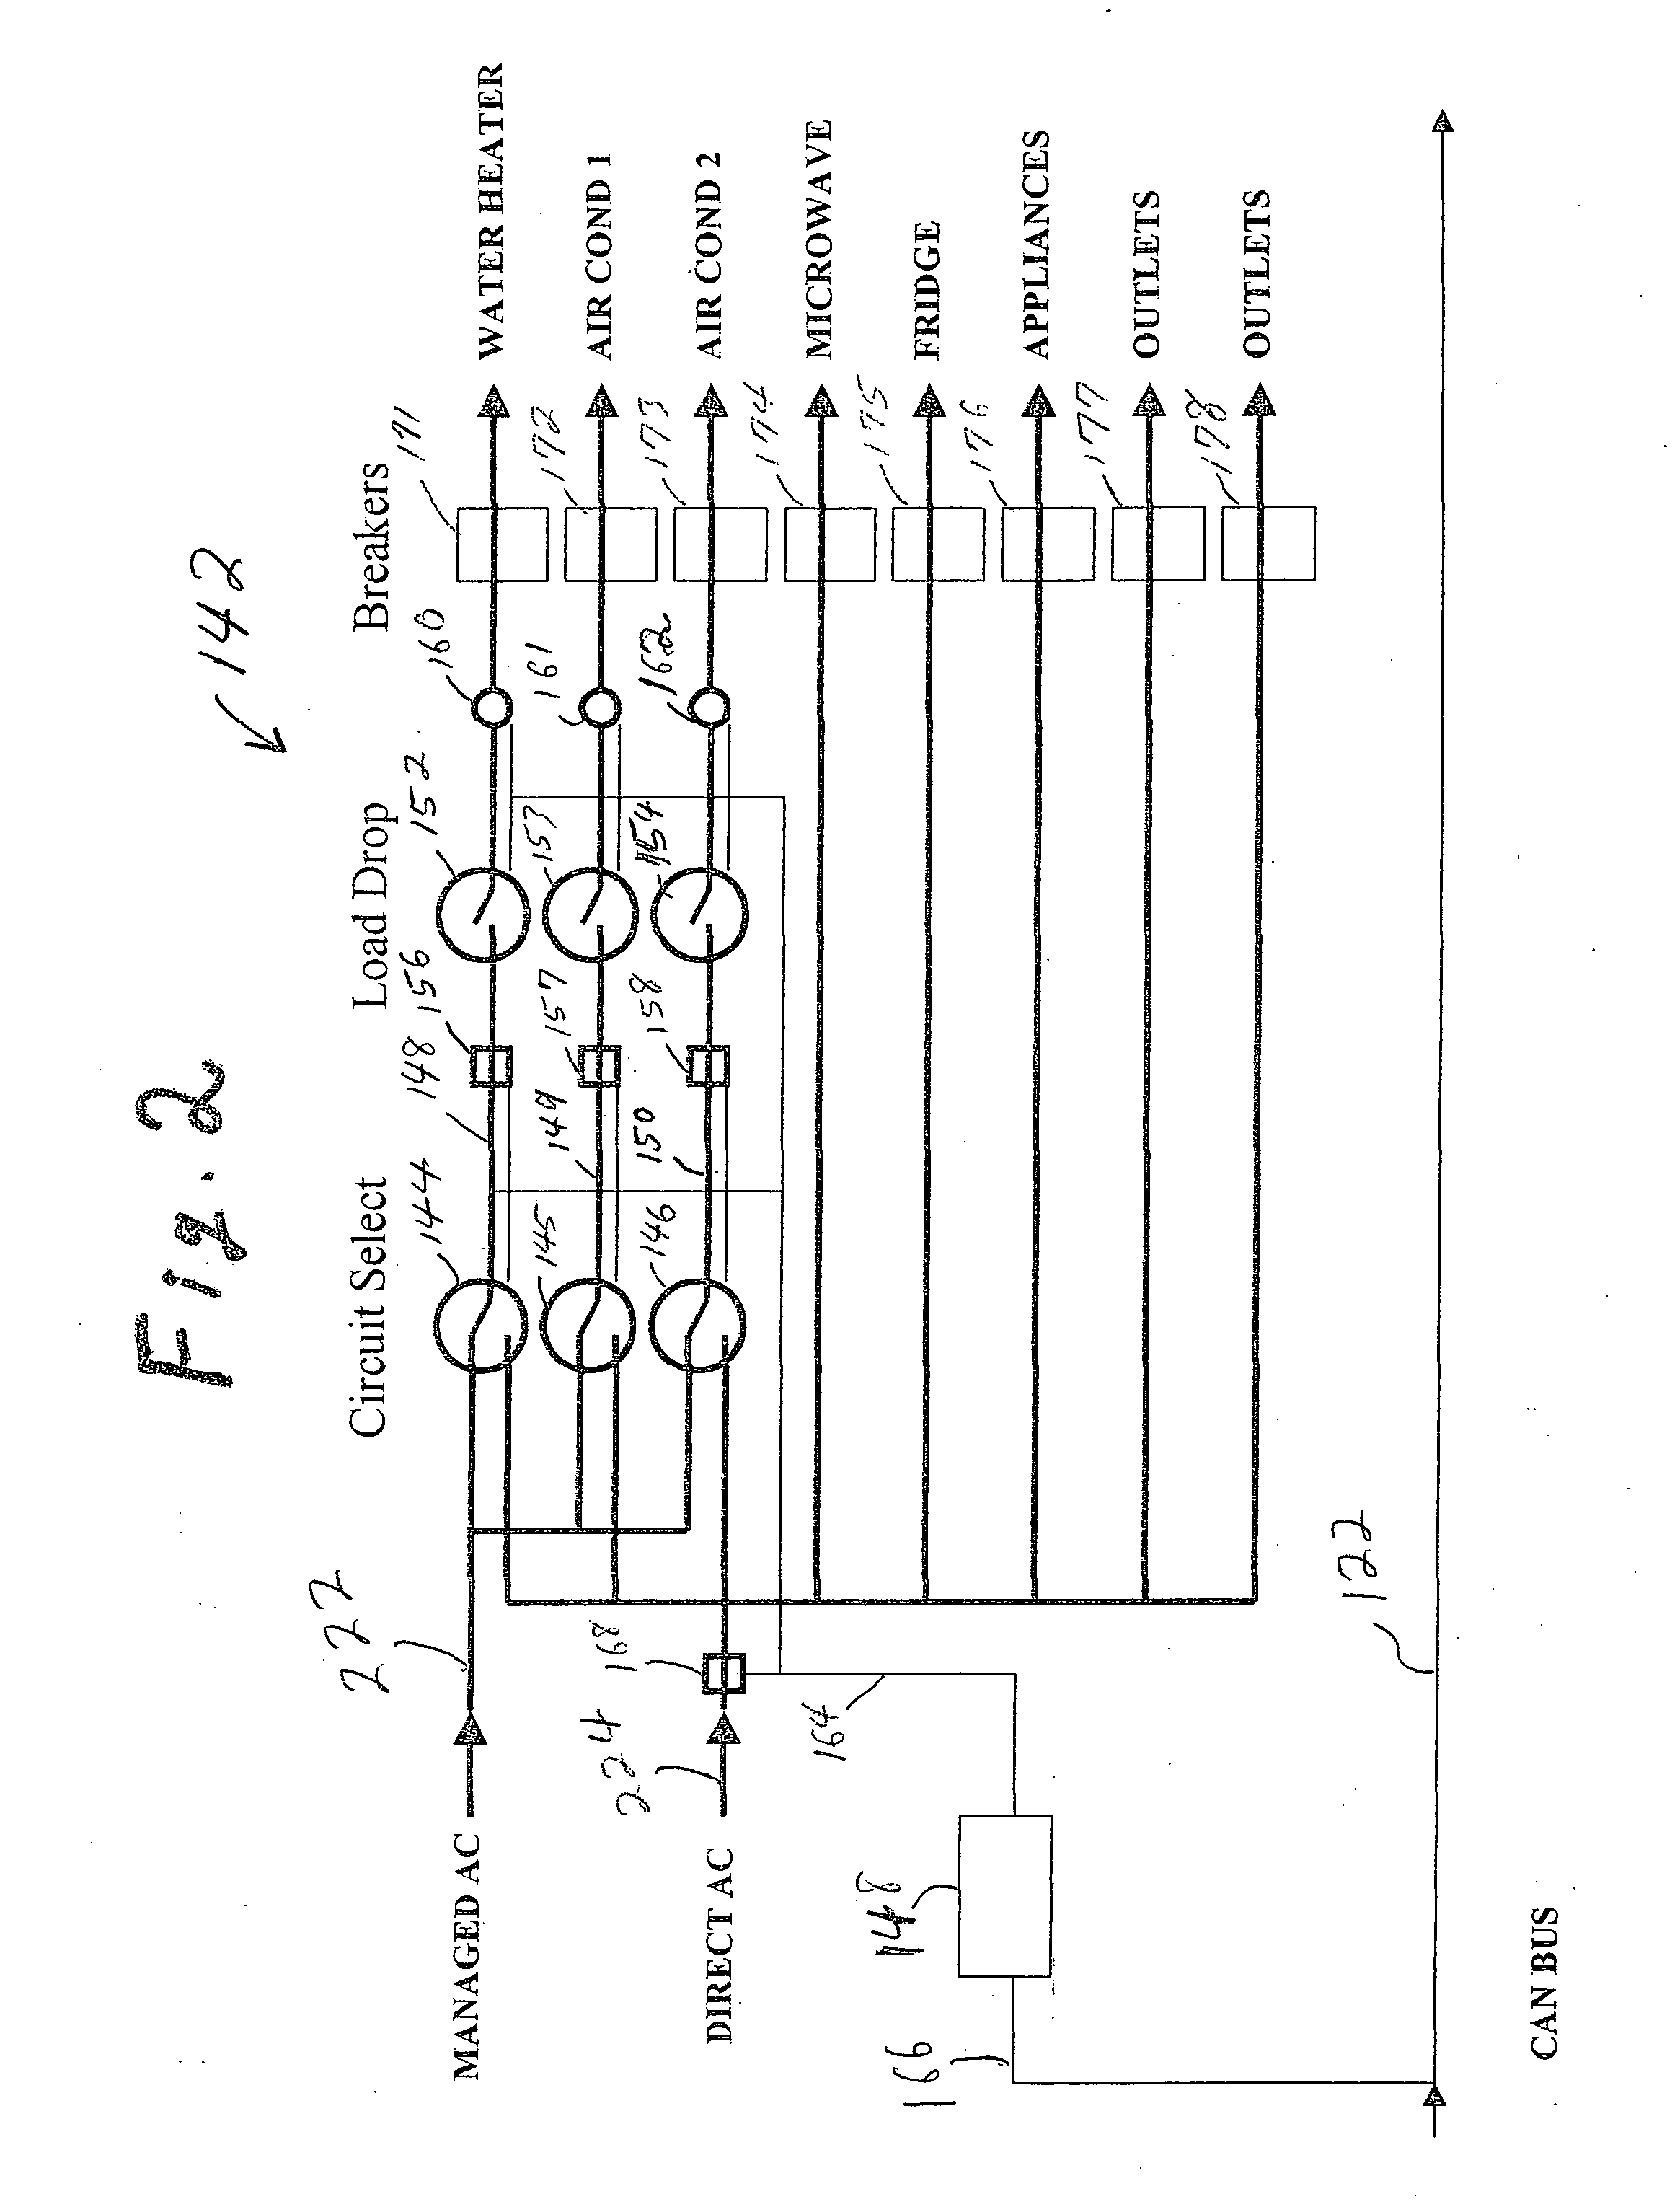 Power averaging and power load management system